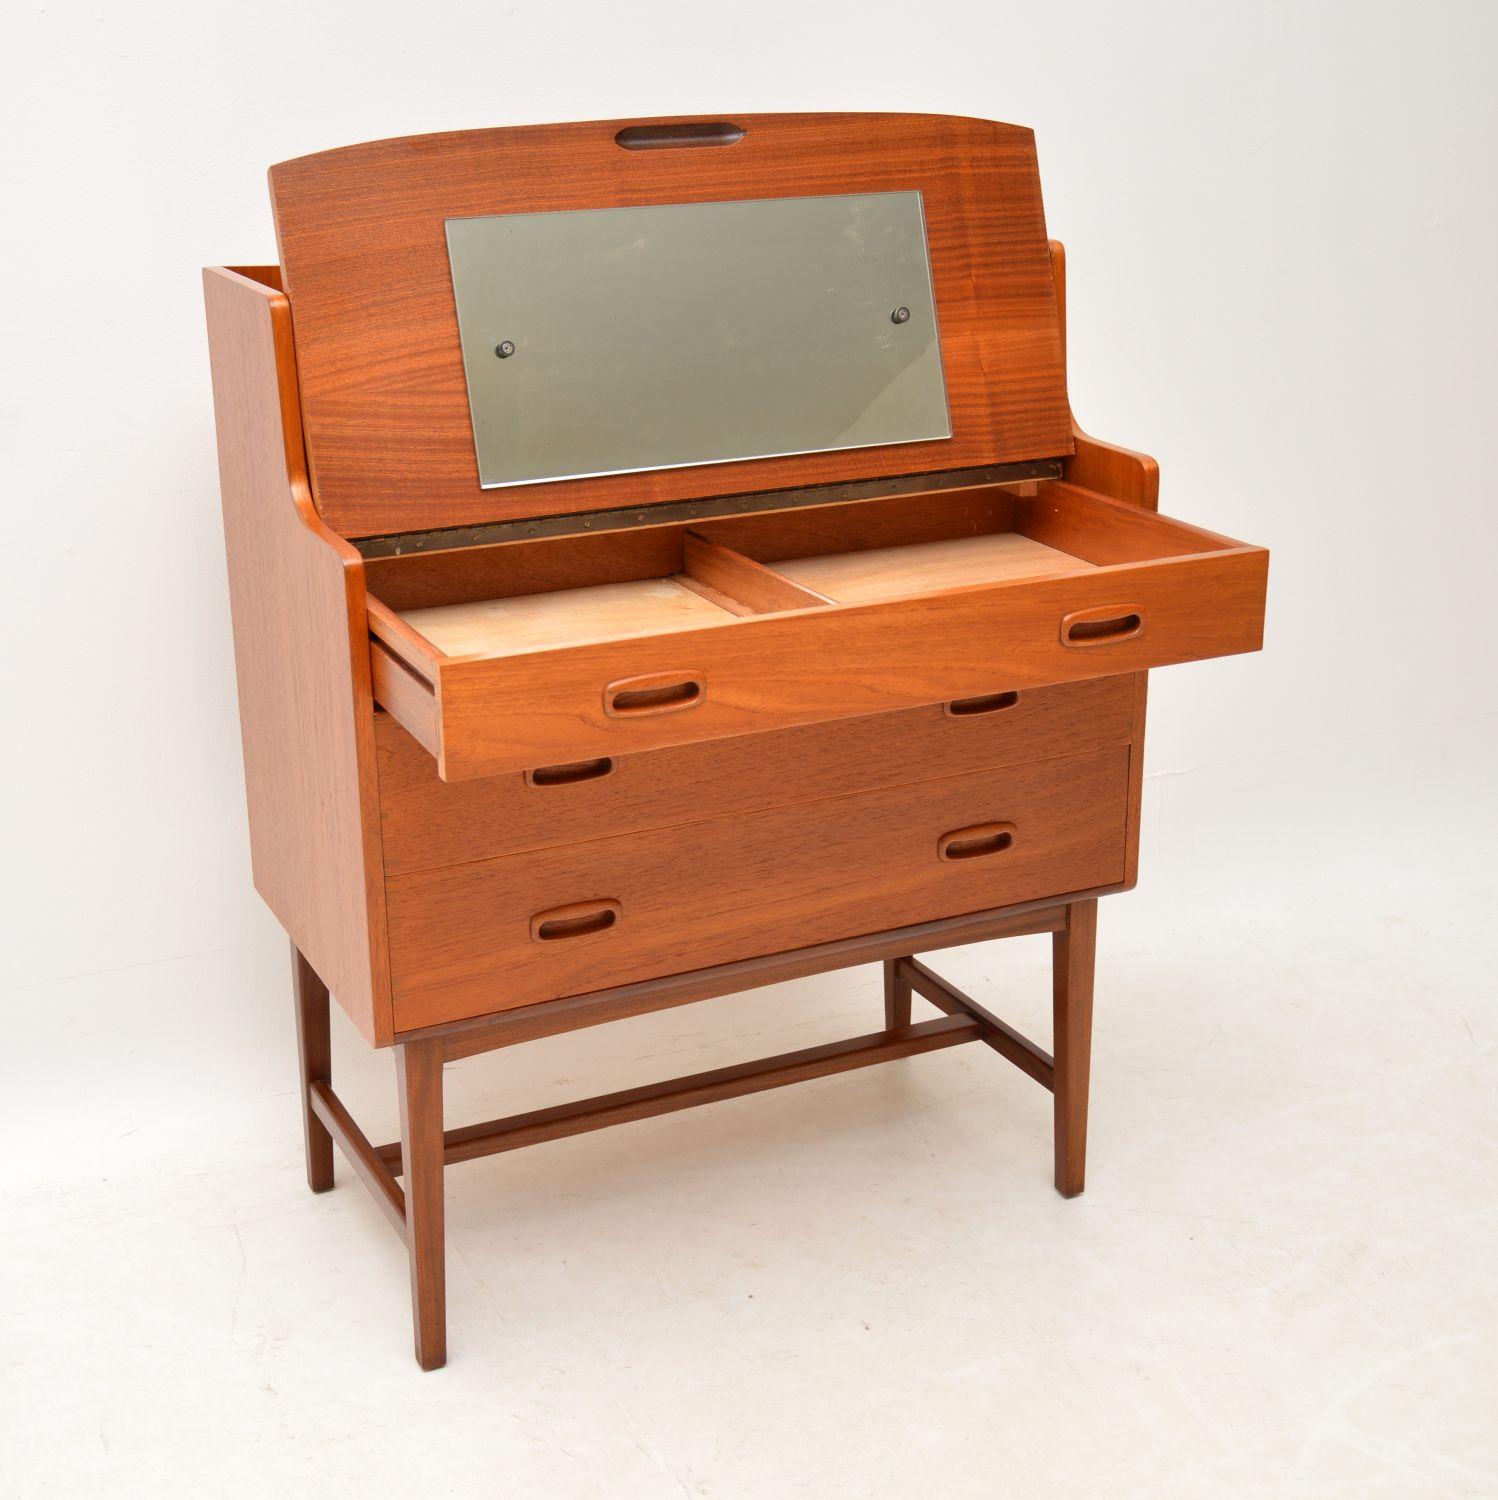 A stylish and practical vintage teak vanity bureau, this dates from the 1960s. It has a fantastic mechanism, the top drawer is a dummy that pulls out and flips up to reveal a mirror and storage space. This can equally be used as a writing bureau or